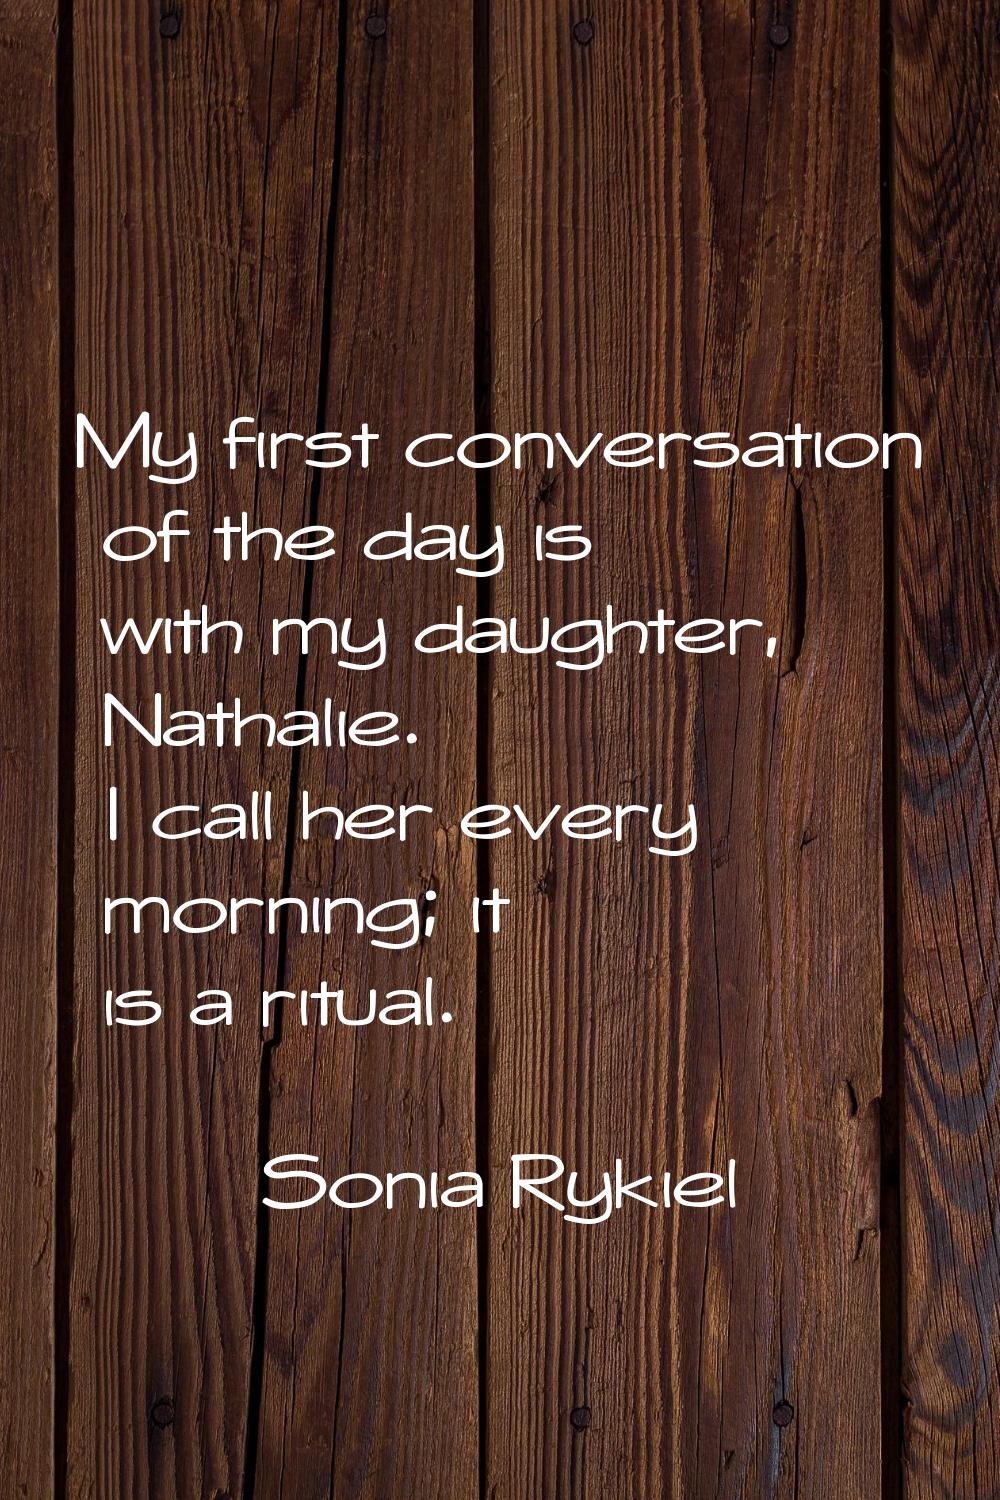 My first conversation of the day is with my daughter, Nathalie. I call her every morning; it is a r